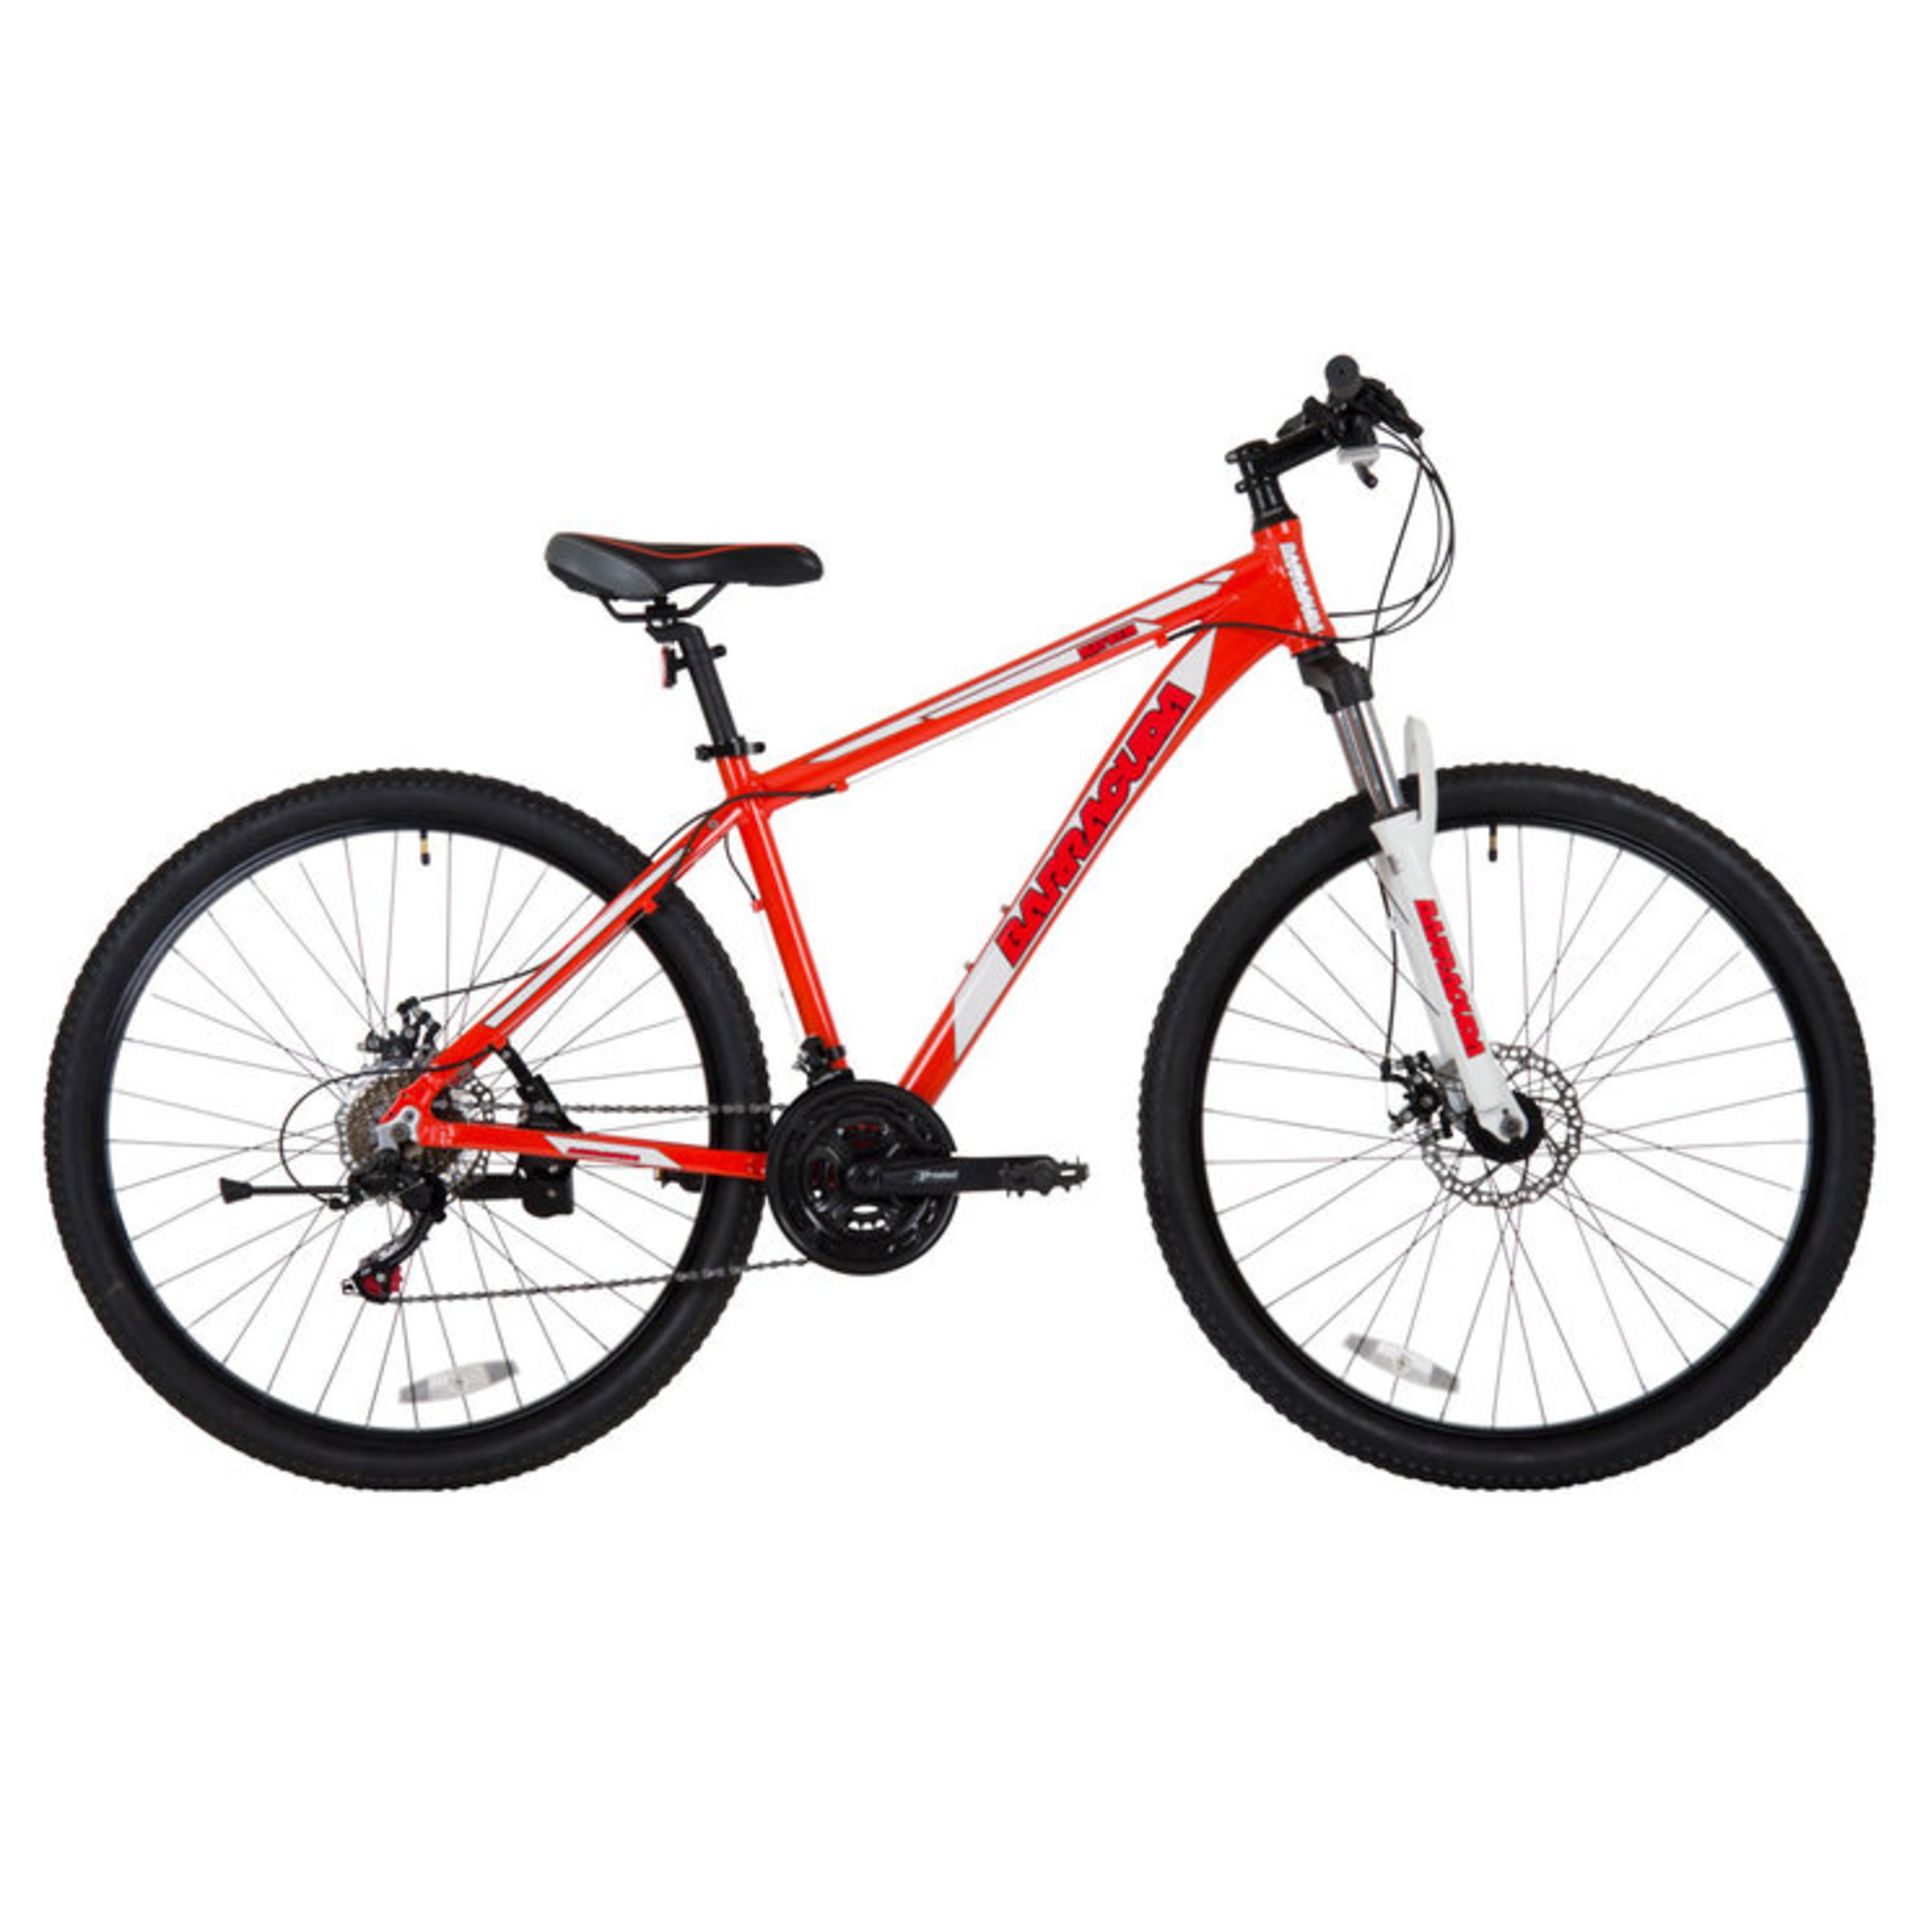 1 BARRACUDA 18" MAYHEM FRONT SUSPENSION MOUNTAIN BIKE IN RED/ WHITE RRP £229.99